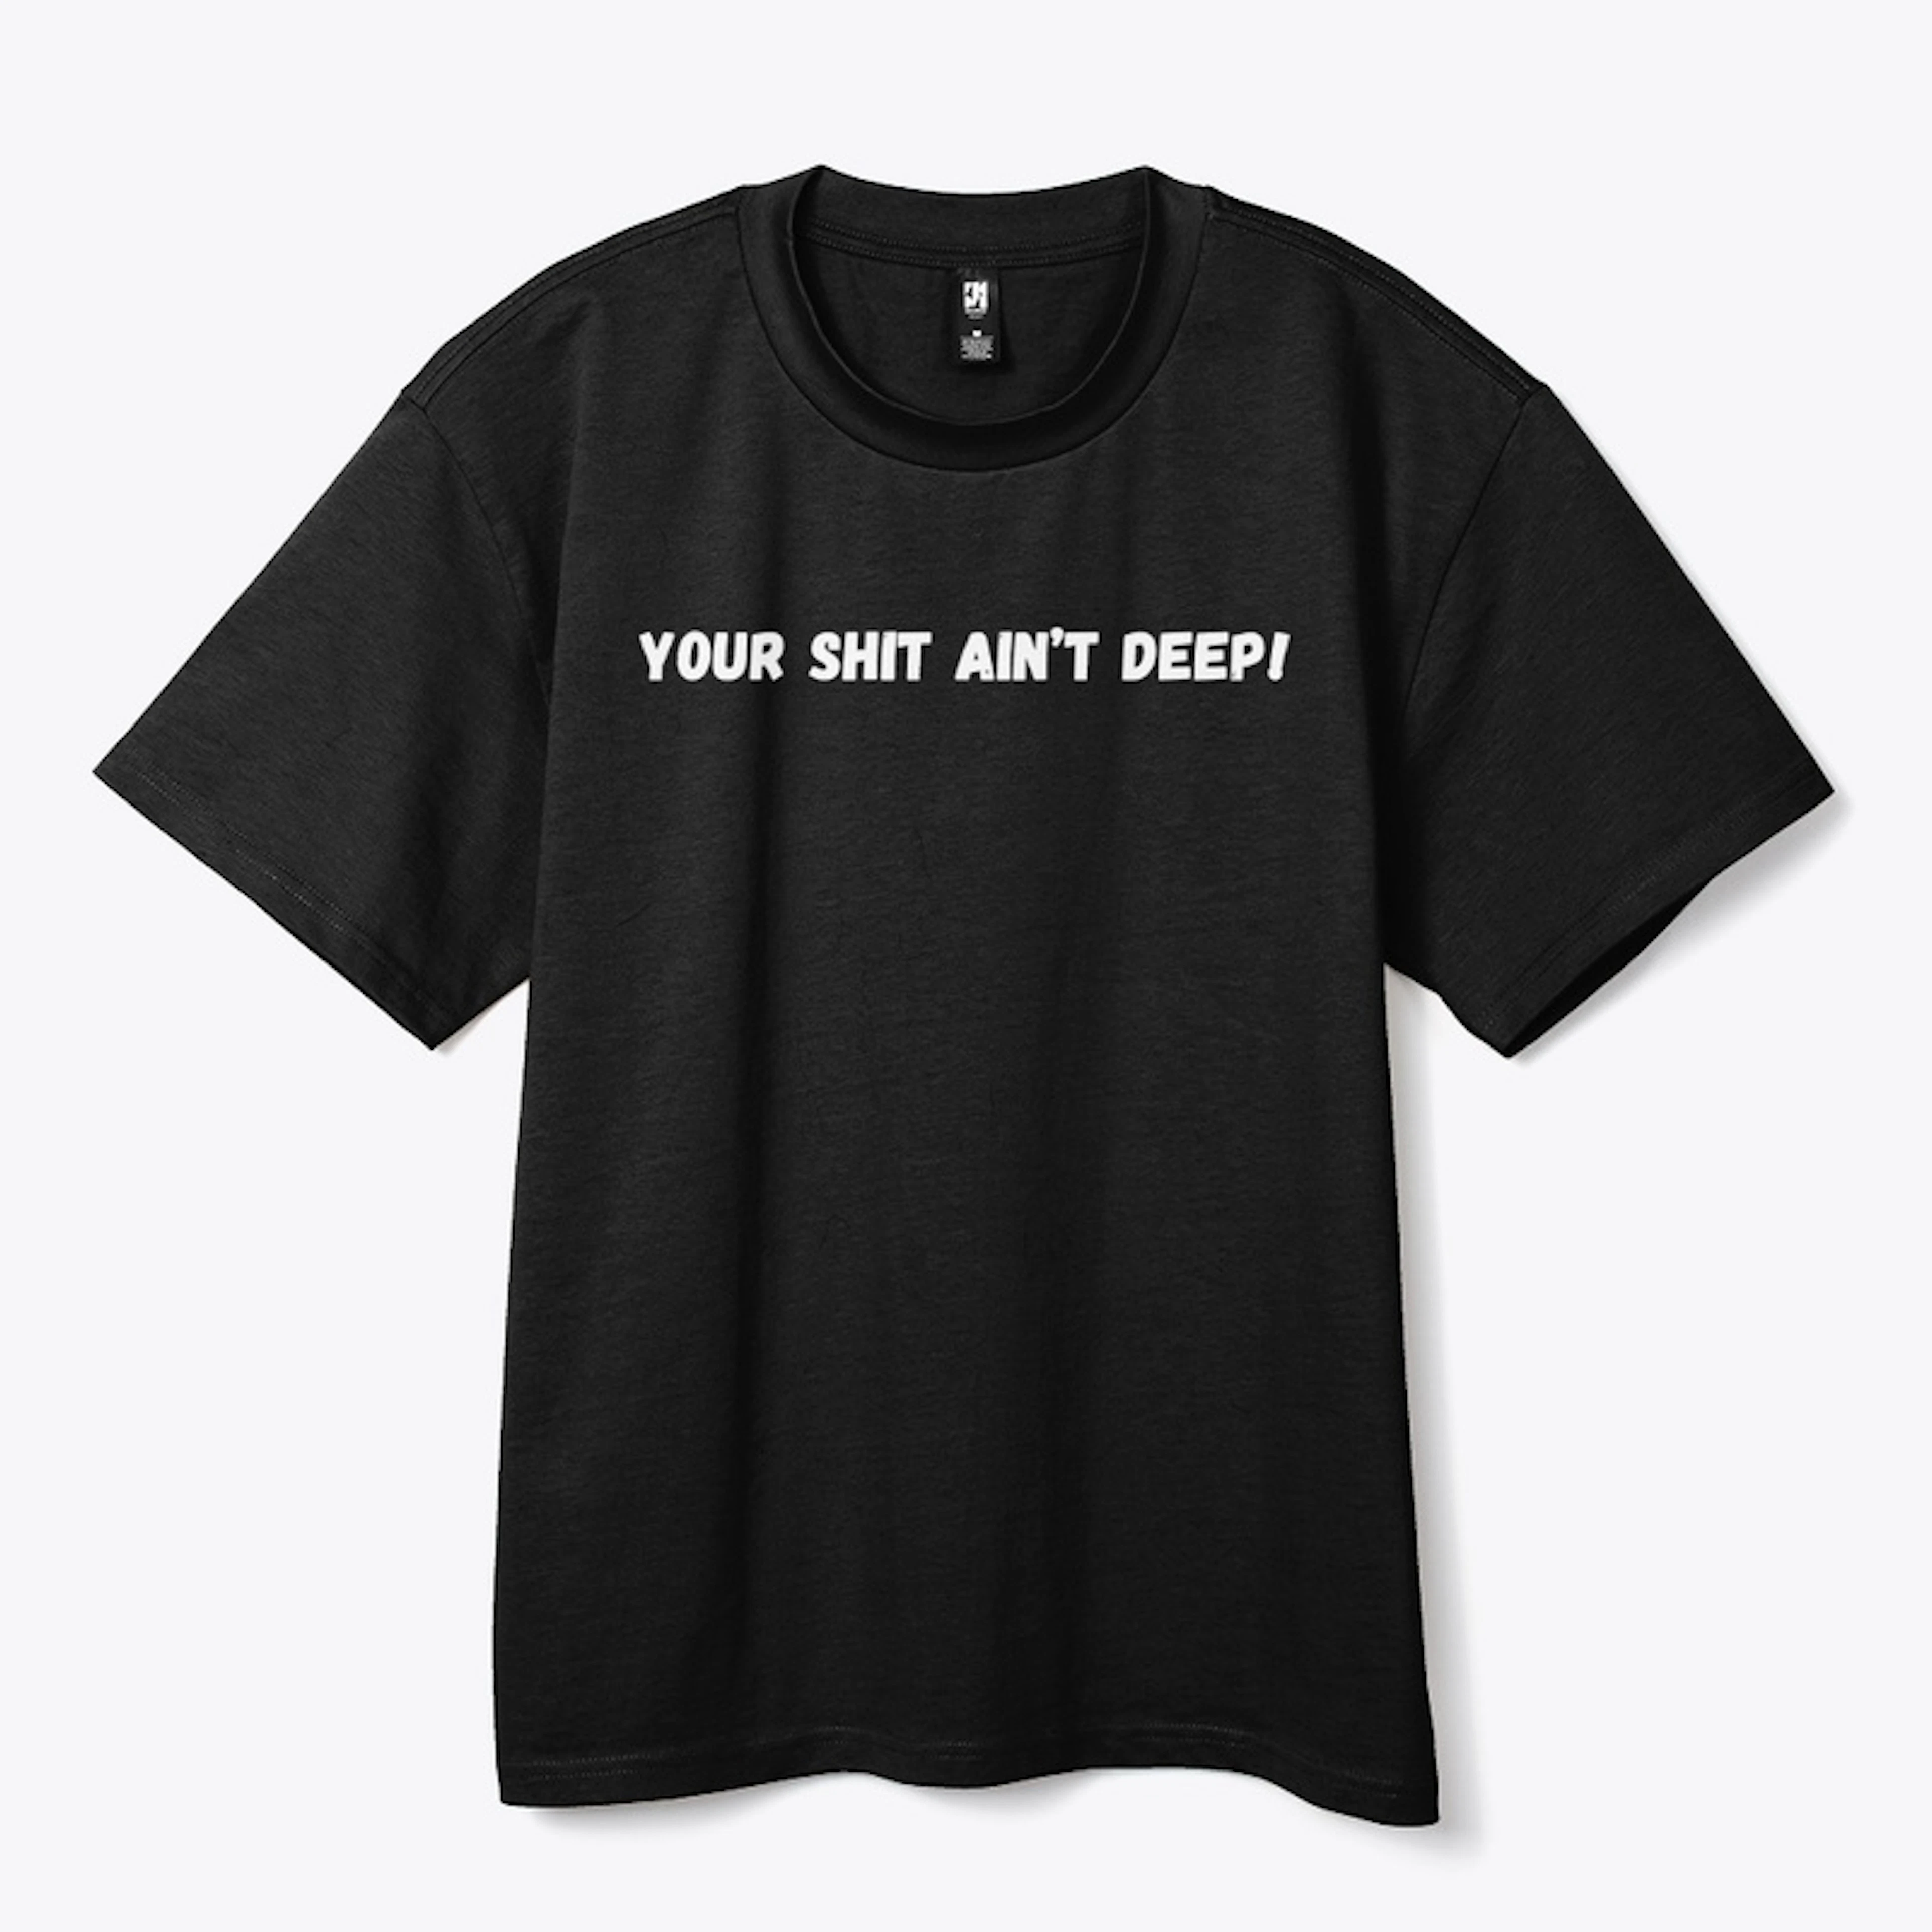 YOUR SHIT AIN'T DEEP